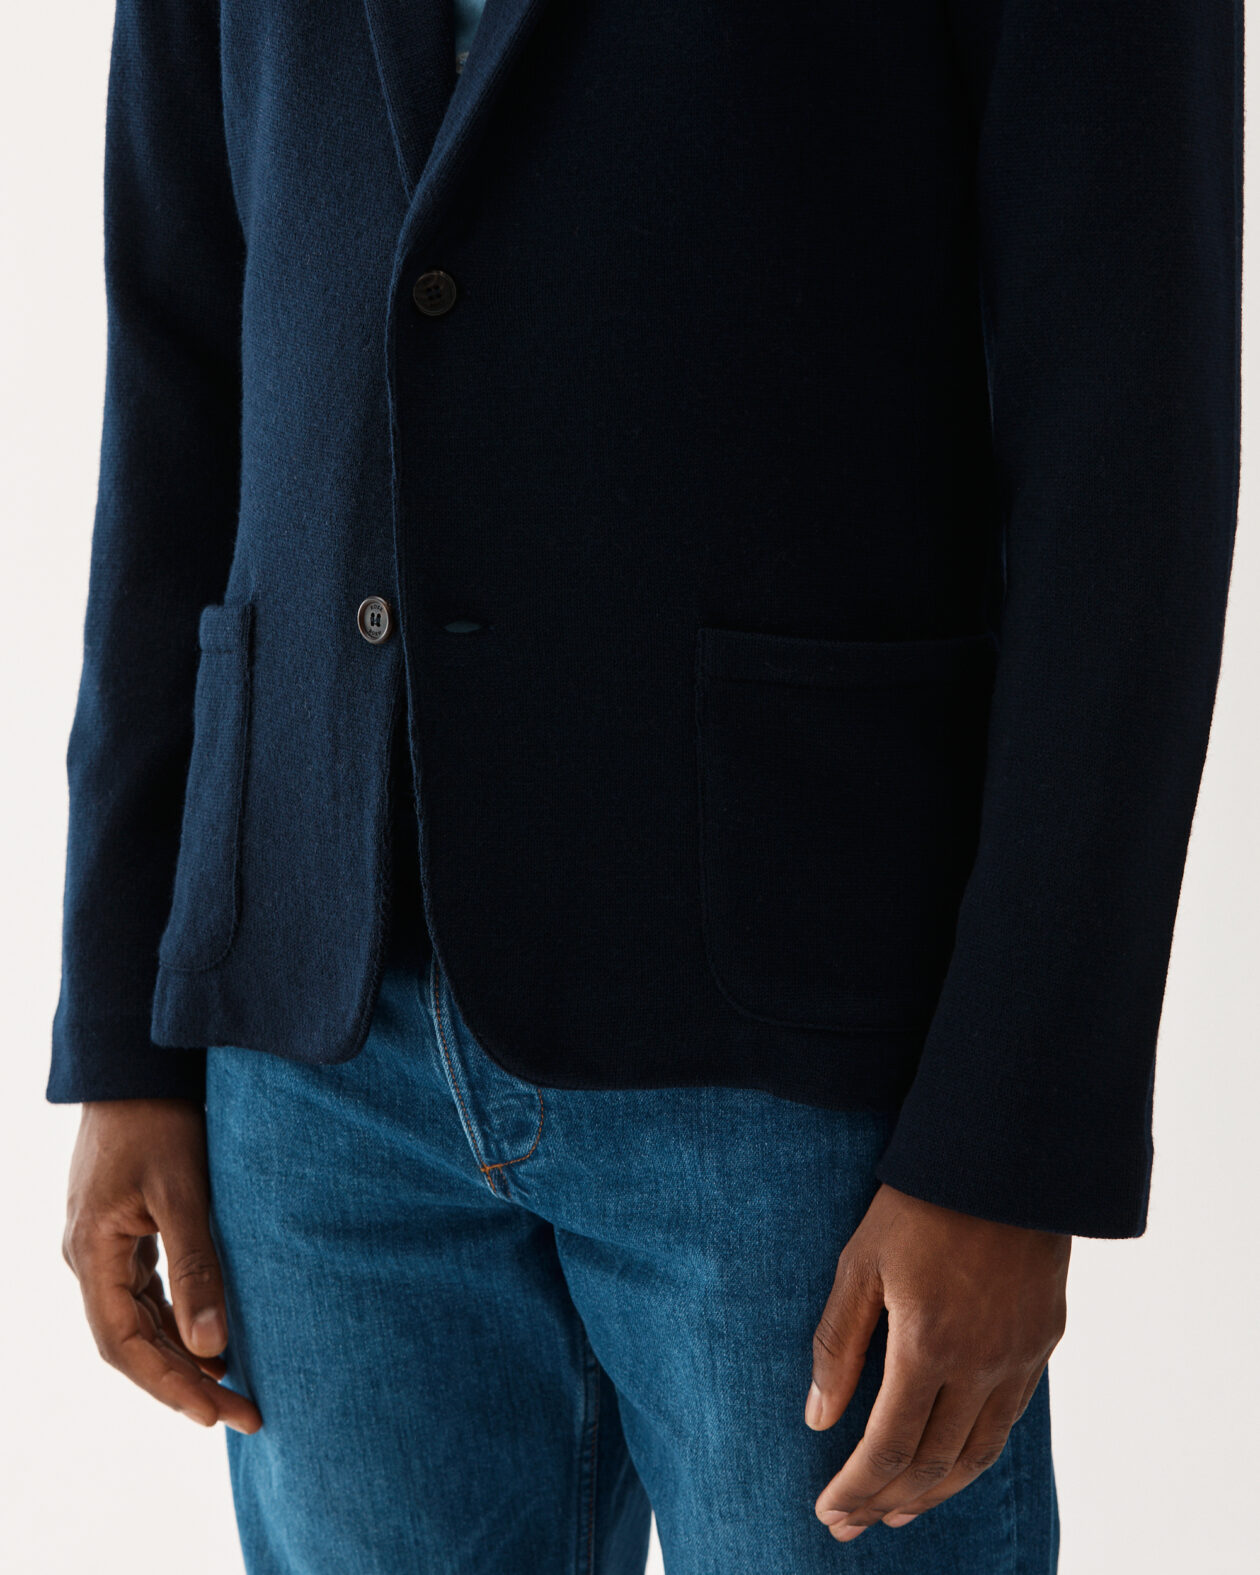 Knitted Wool Jacket Navy